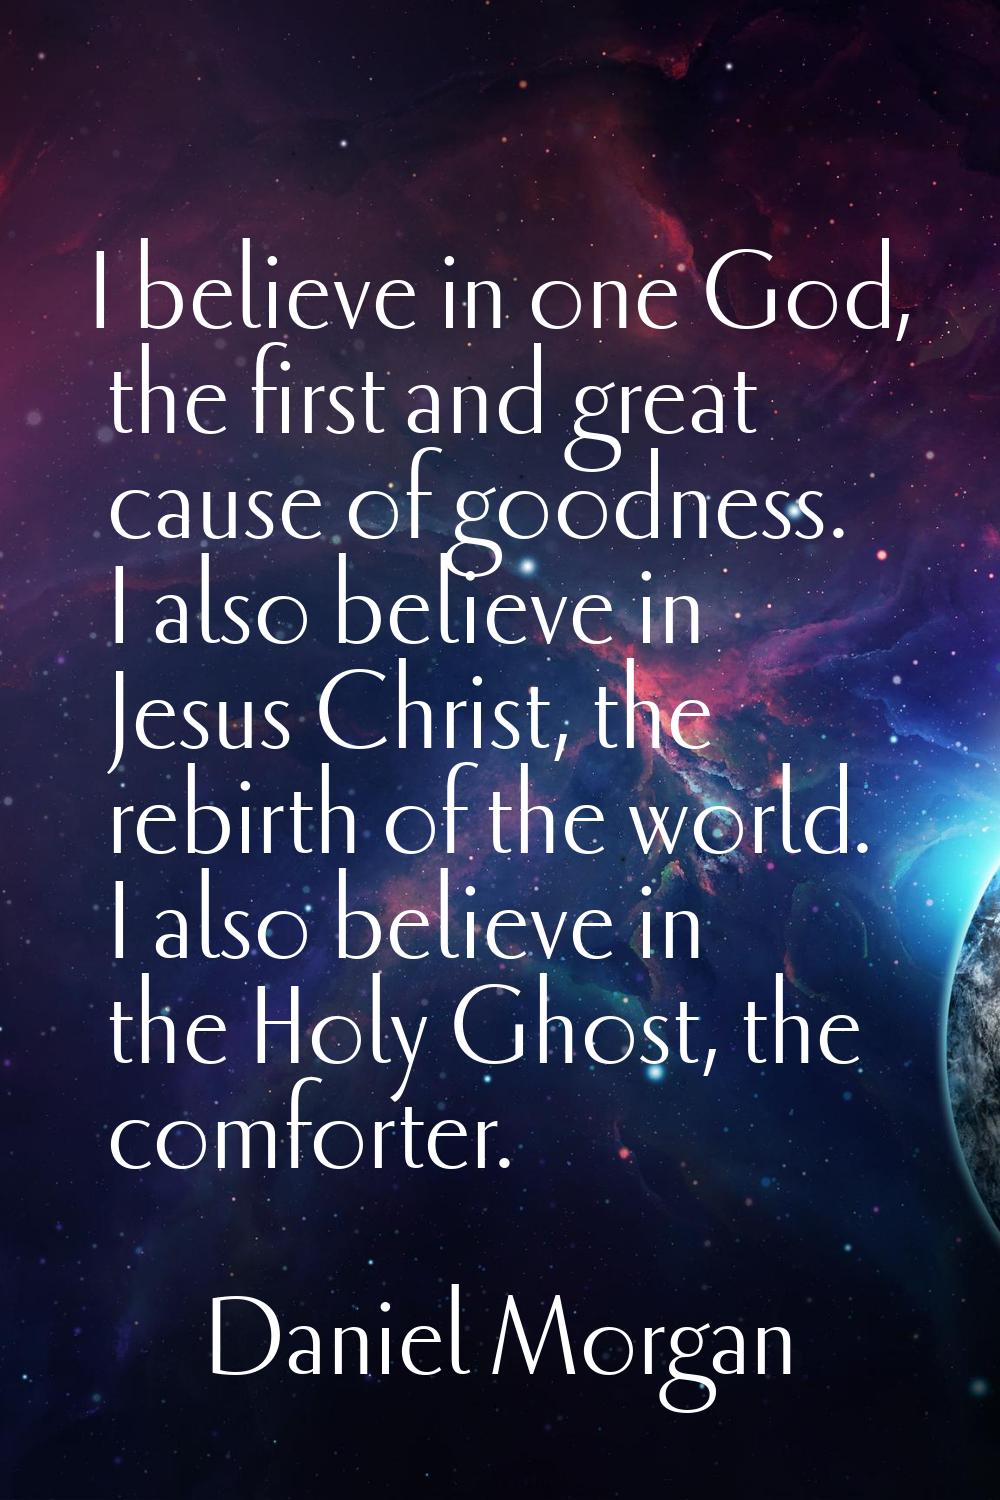 I believe in one God, the first and great cause of goodness. I also believe in Jesus Christ, the re